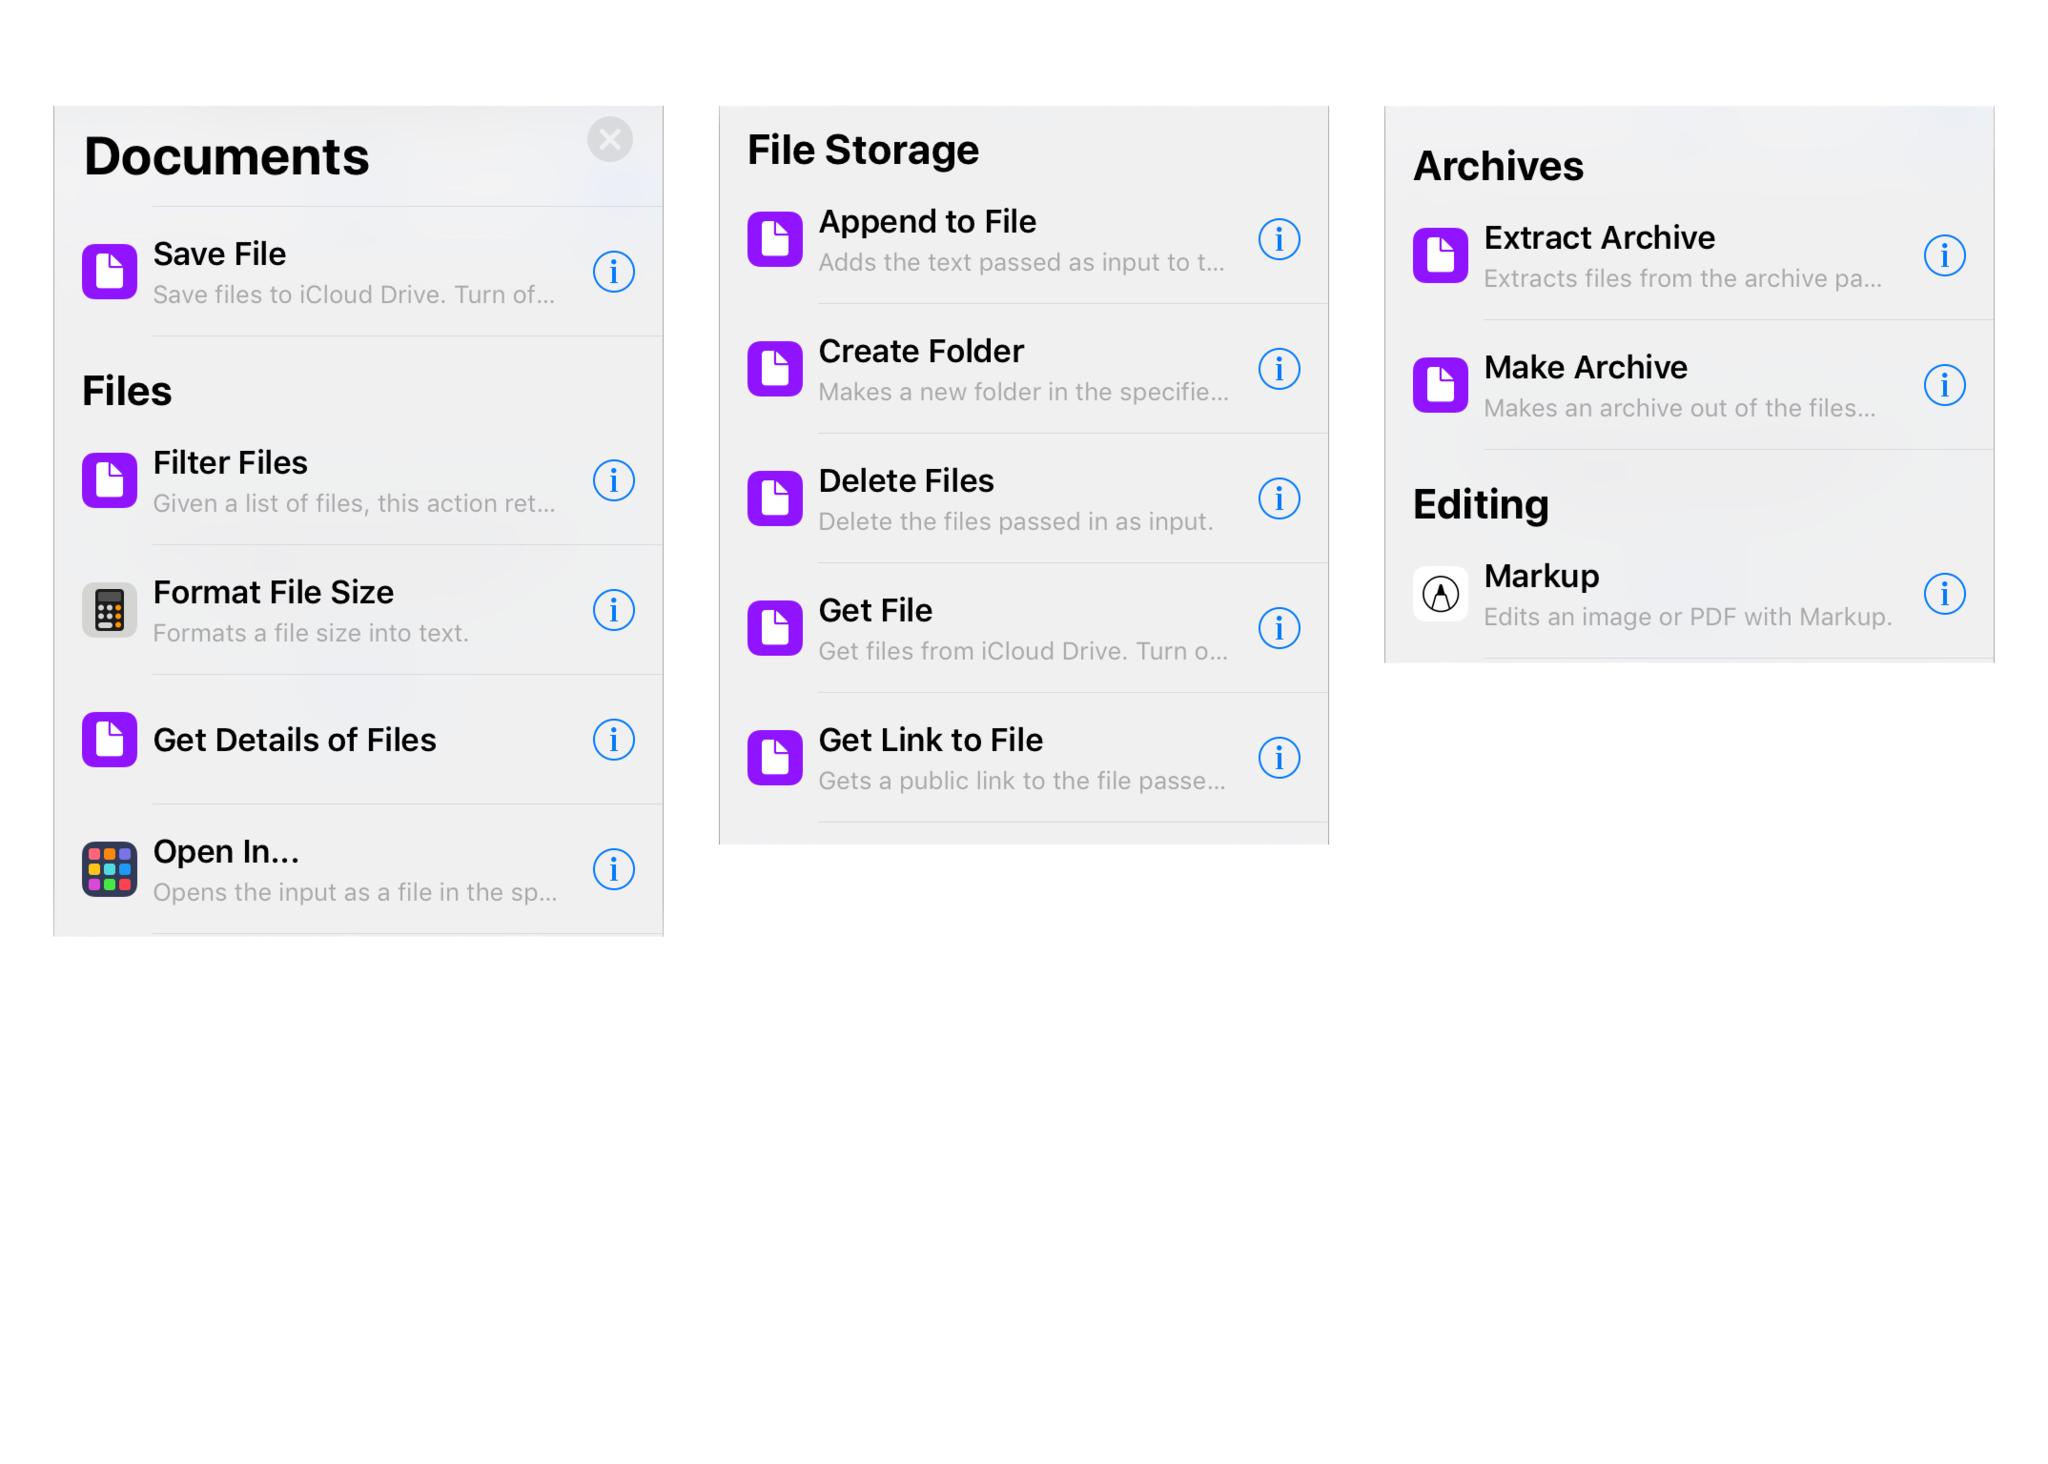 Image showing clipped screenshots of Shortcuts actions, including the Documents category